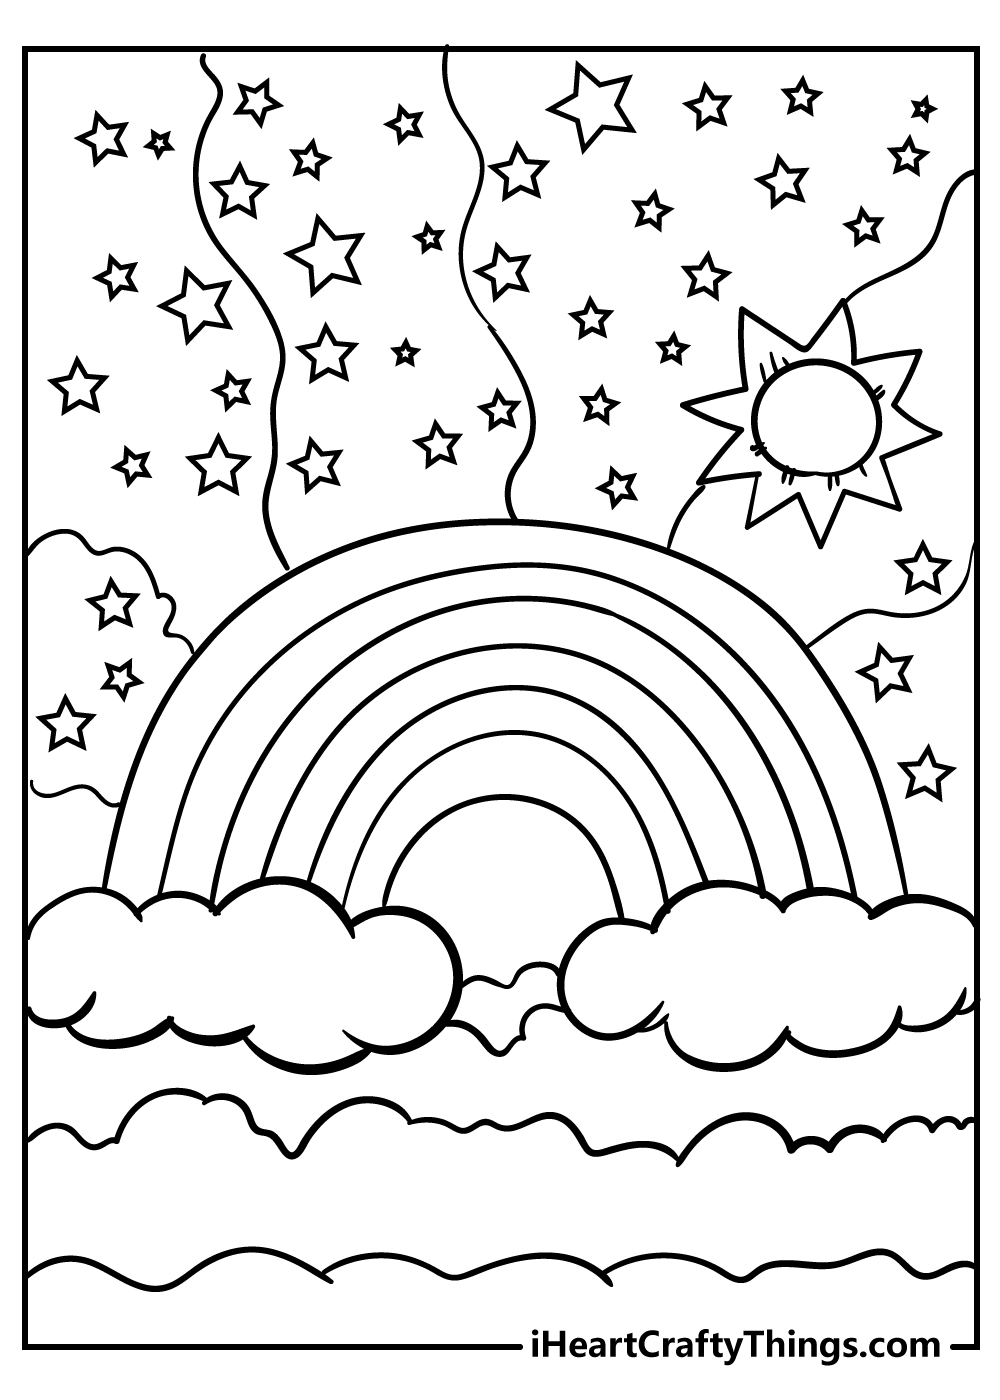 Rainbow Coloring Pages Updated 20